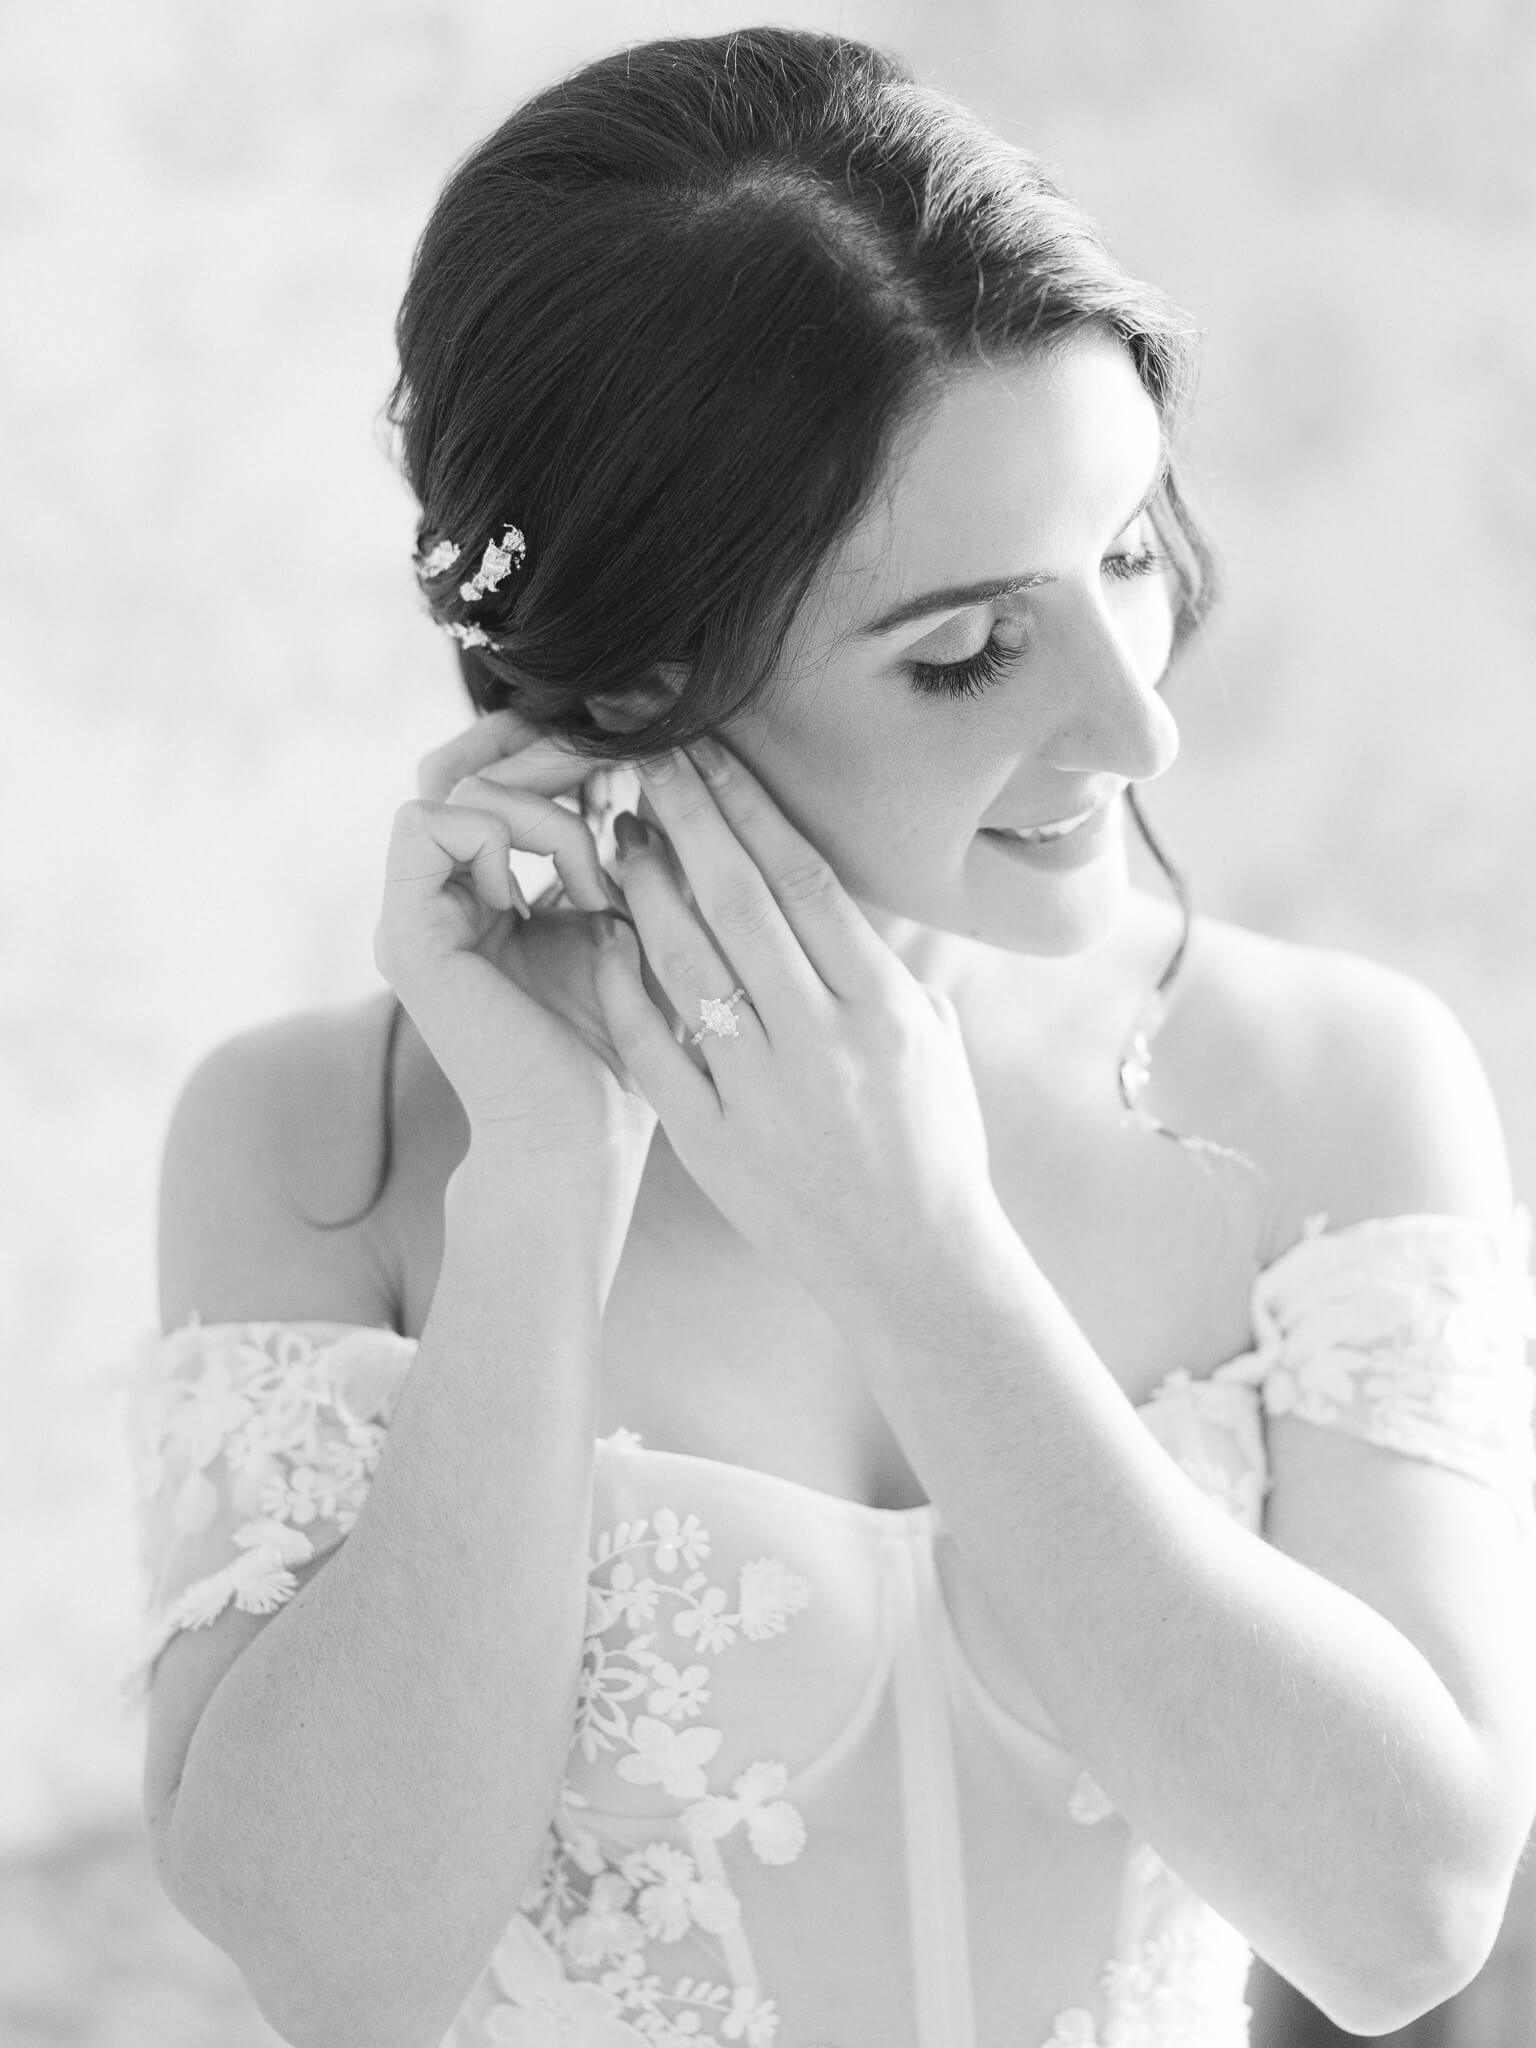 A black and white close up image of a bride in her wedding dress putting on her earrings.